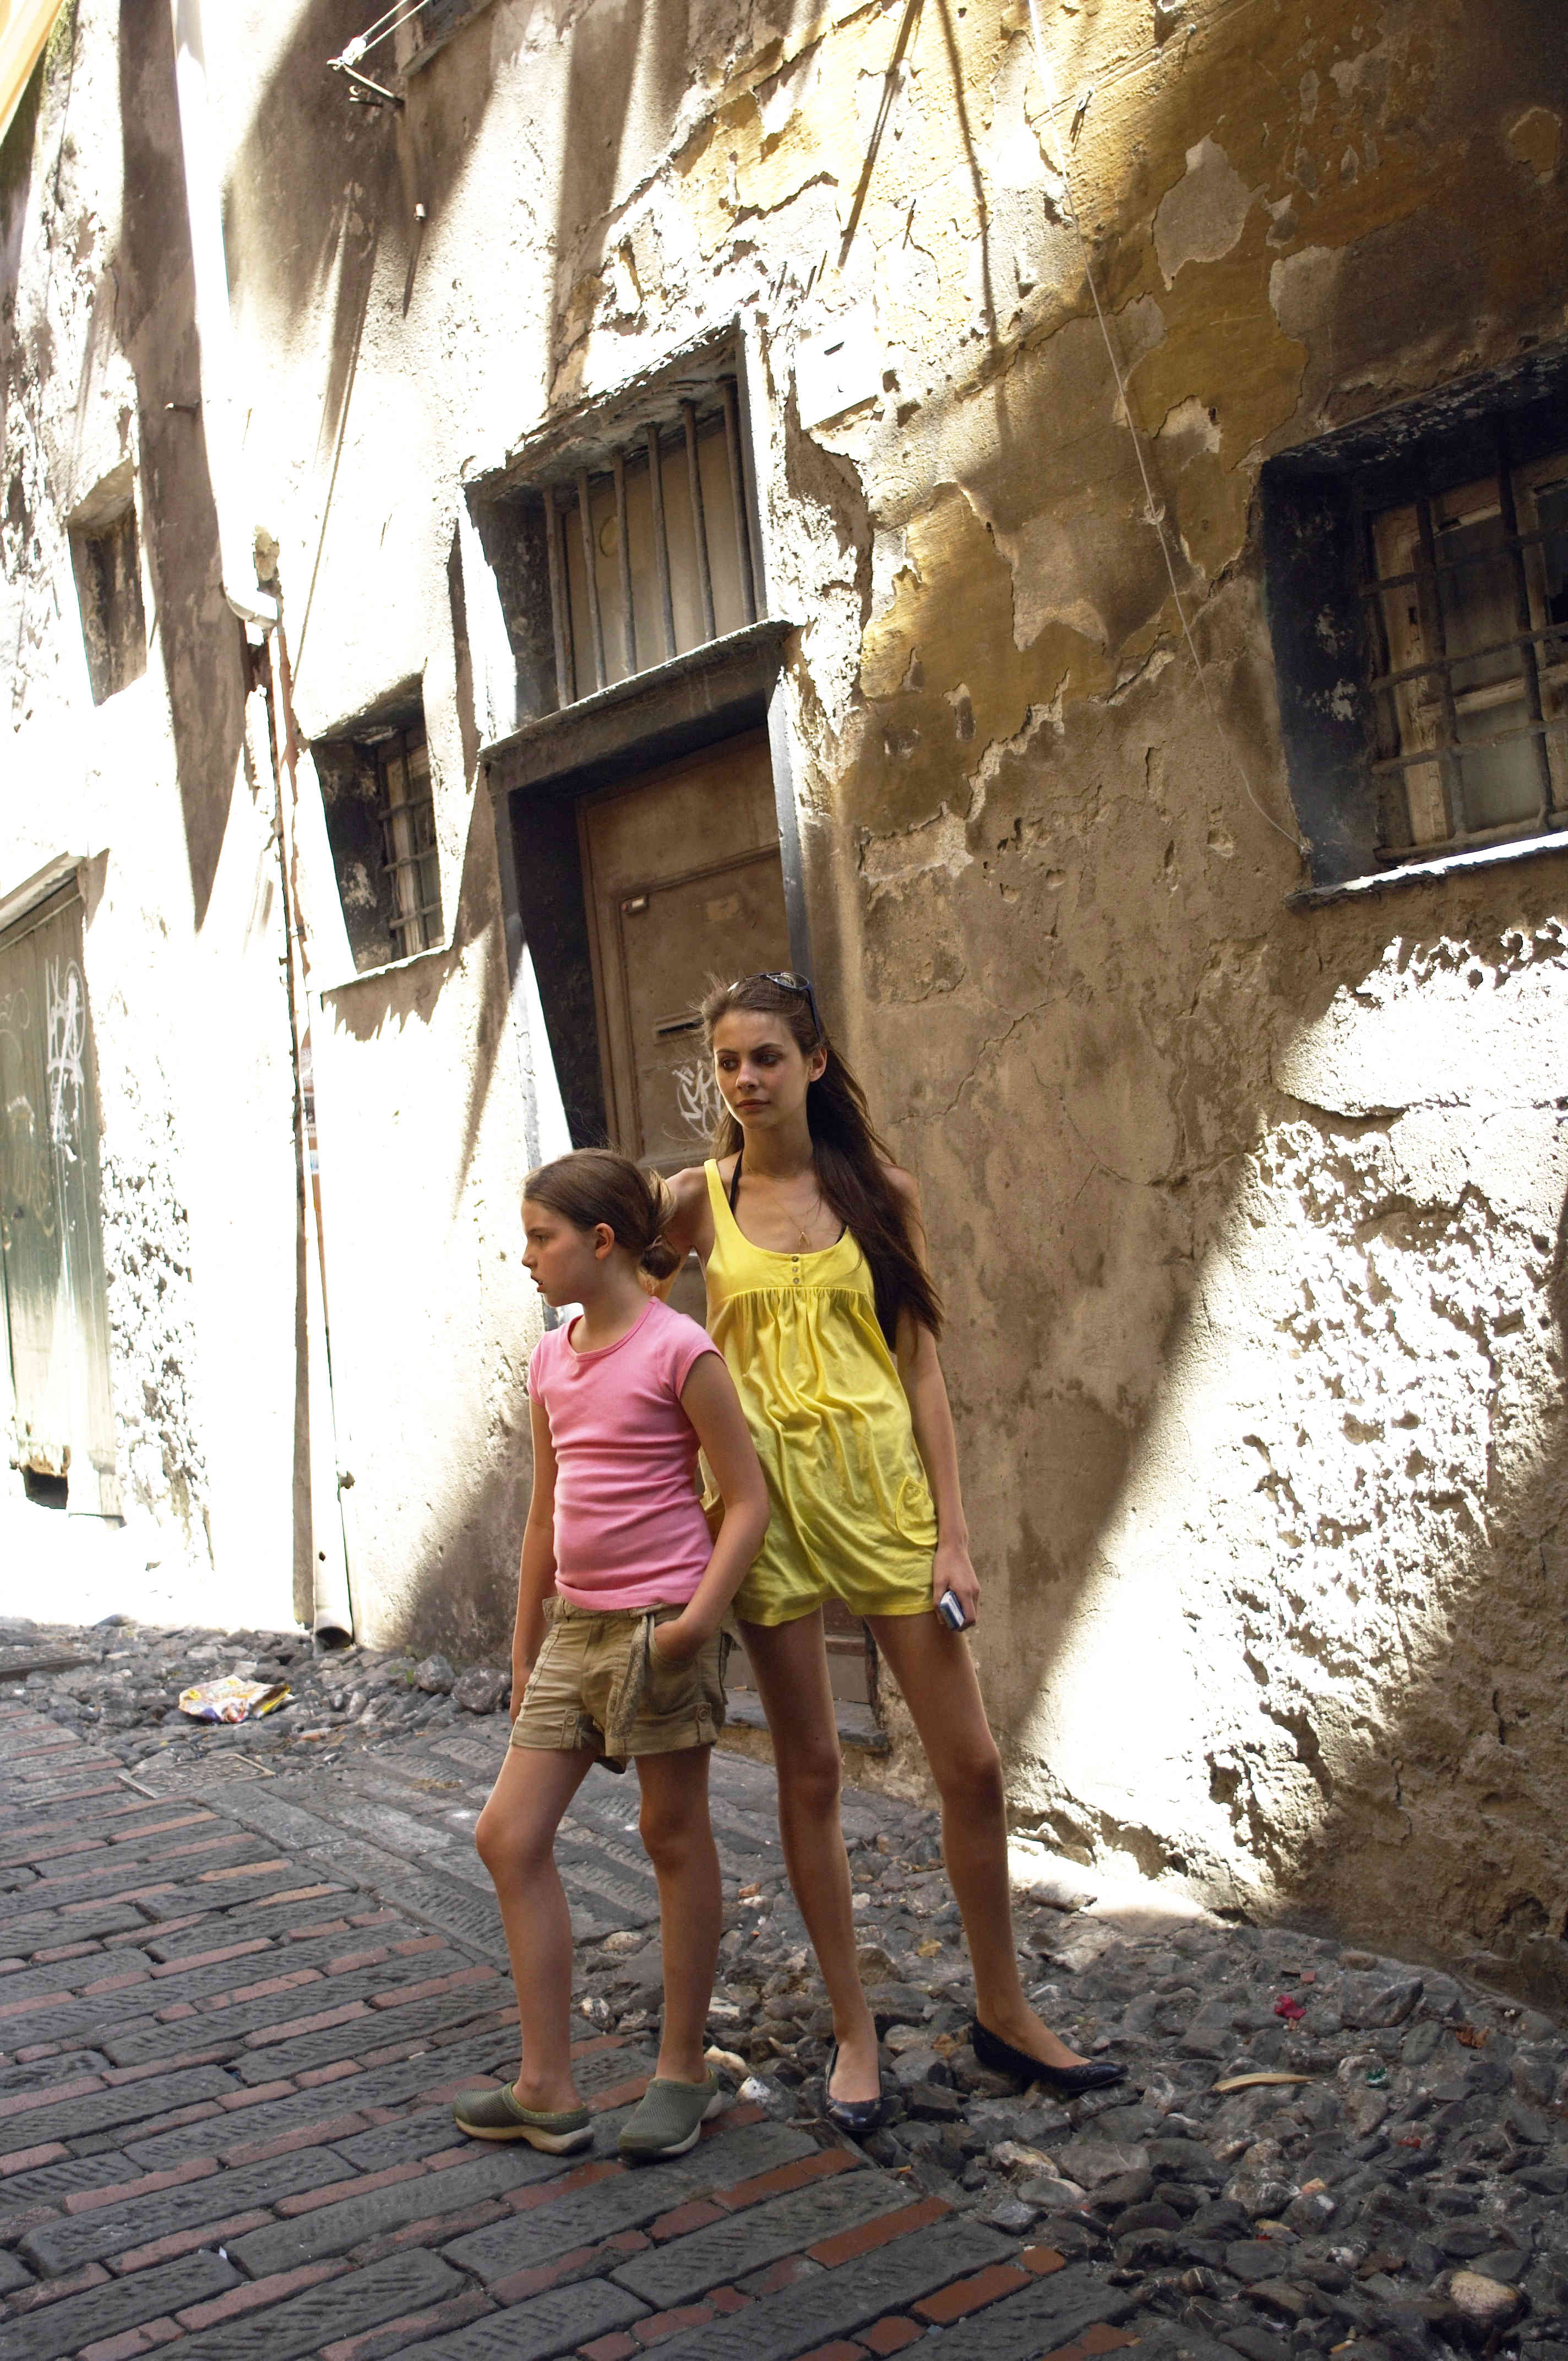 Perla Haney-Jardine stars as Mary and Willa Holland stars as Kelly in E1 Entertainment's Summer in Genoa, A (2009)